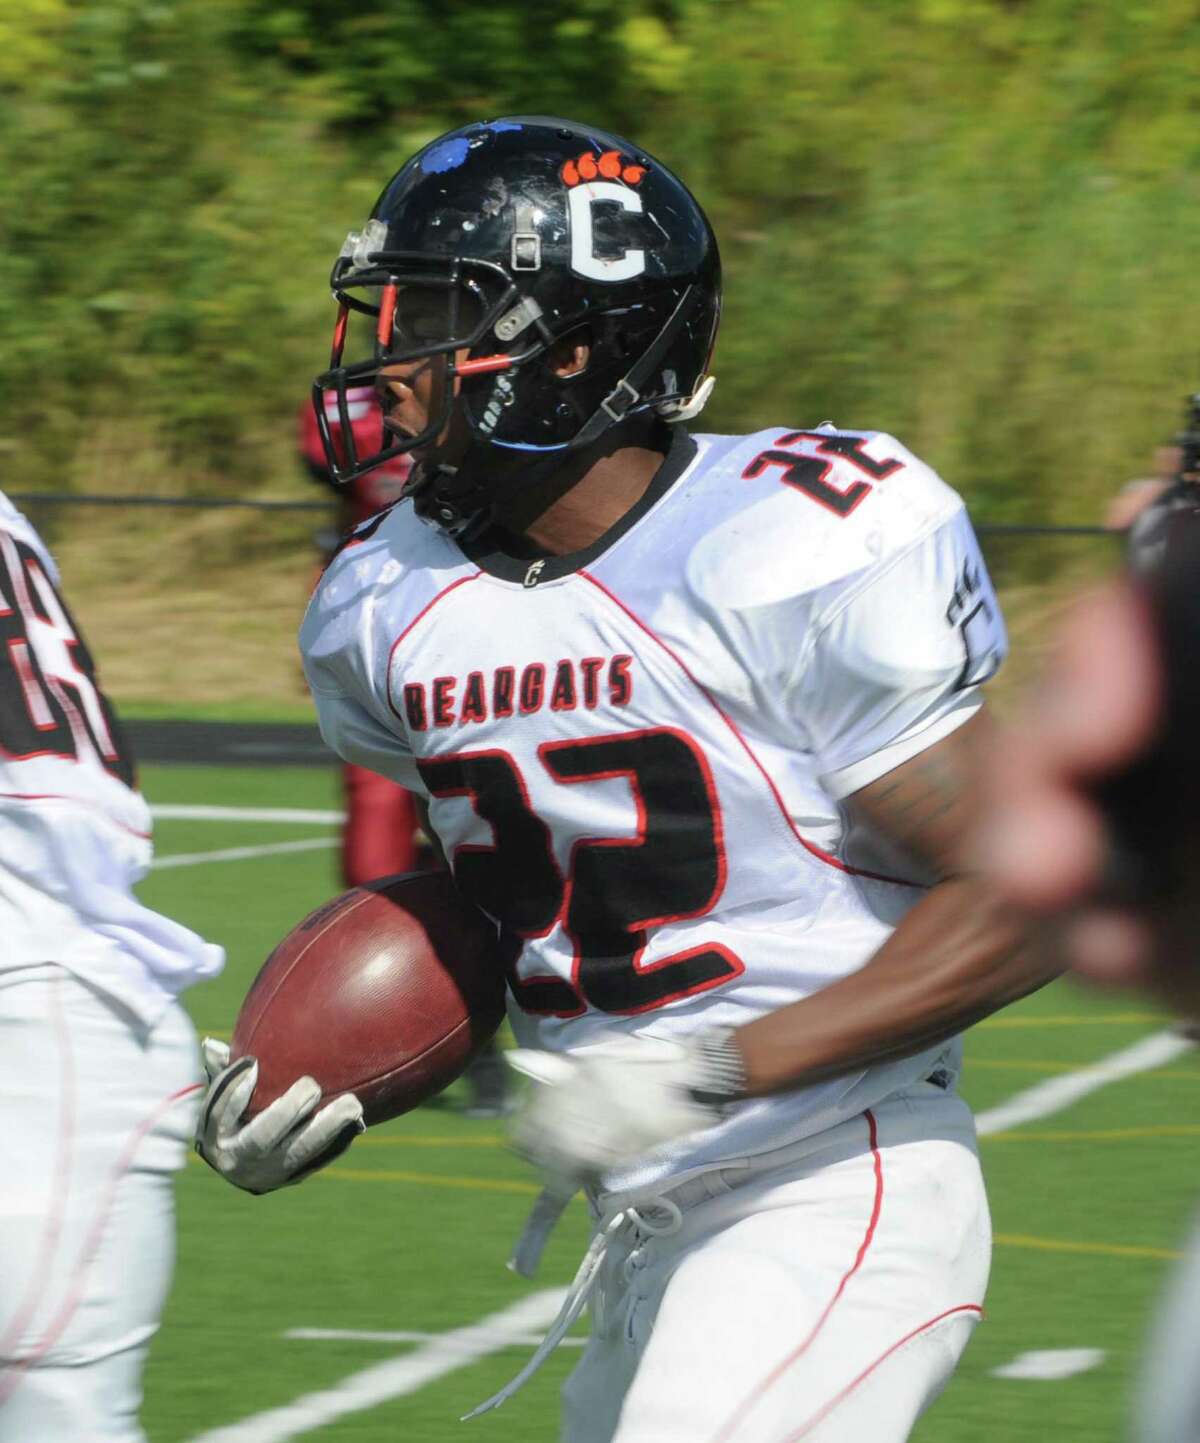 Connecticut Bearcat Eric Brown has possession of the ball during a game against the Western Connecticut Militia on Sunday September 16, 2012 at Immaculate High School in Danbury.